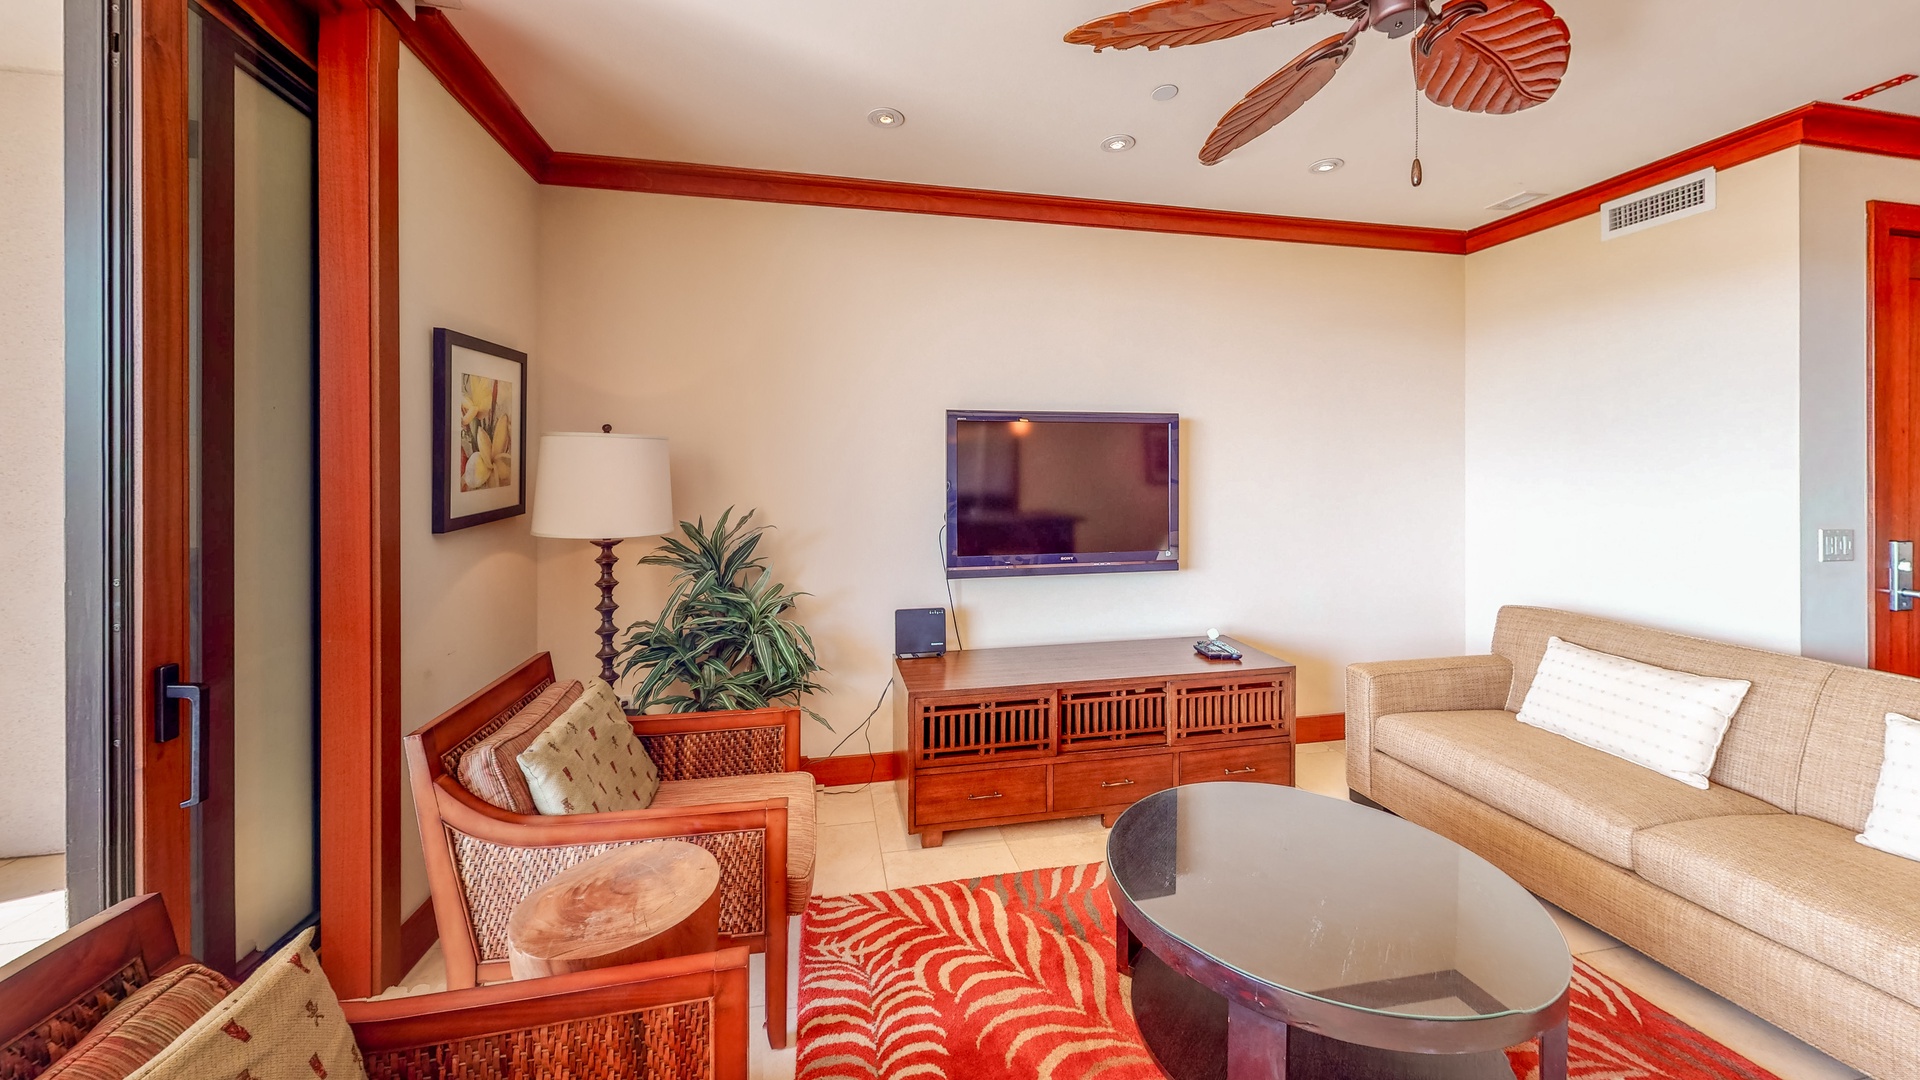 Kapolei Vacation Rentals, Ko Olina Beach Villas O401 - Vibrant decor and a relaxing setting with TV for movie nights.